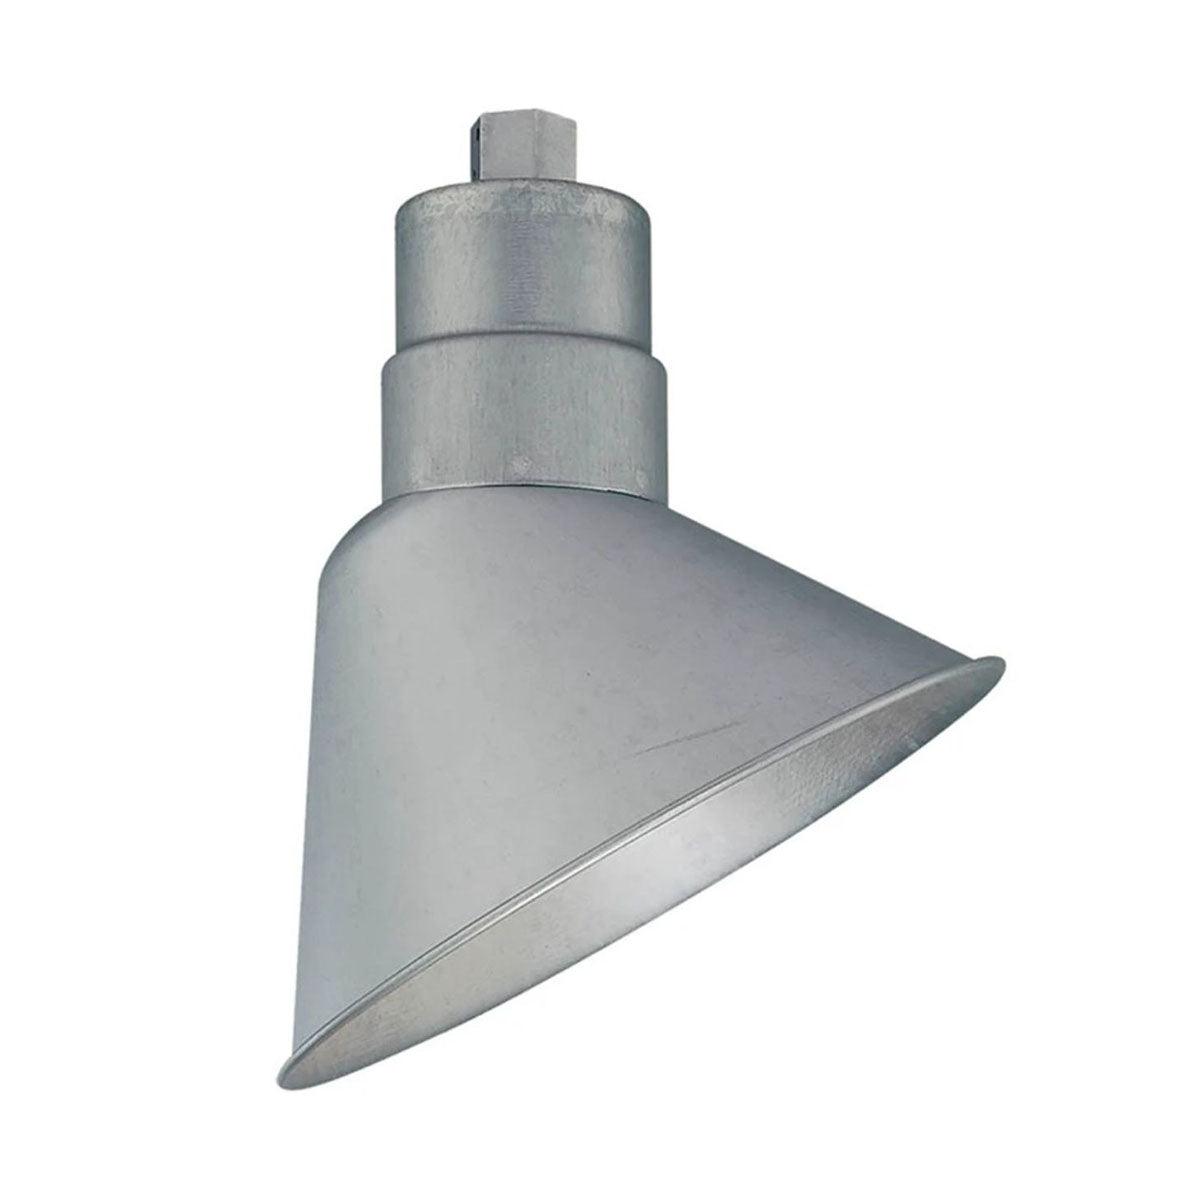 R series 10 In. Outdoor Angle Shade with 3/4 In. Fitter